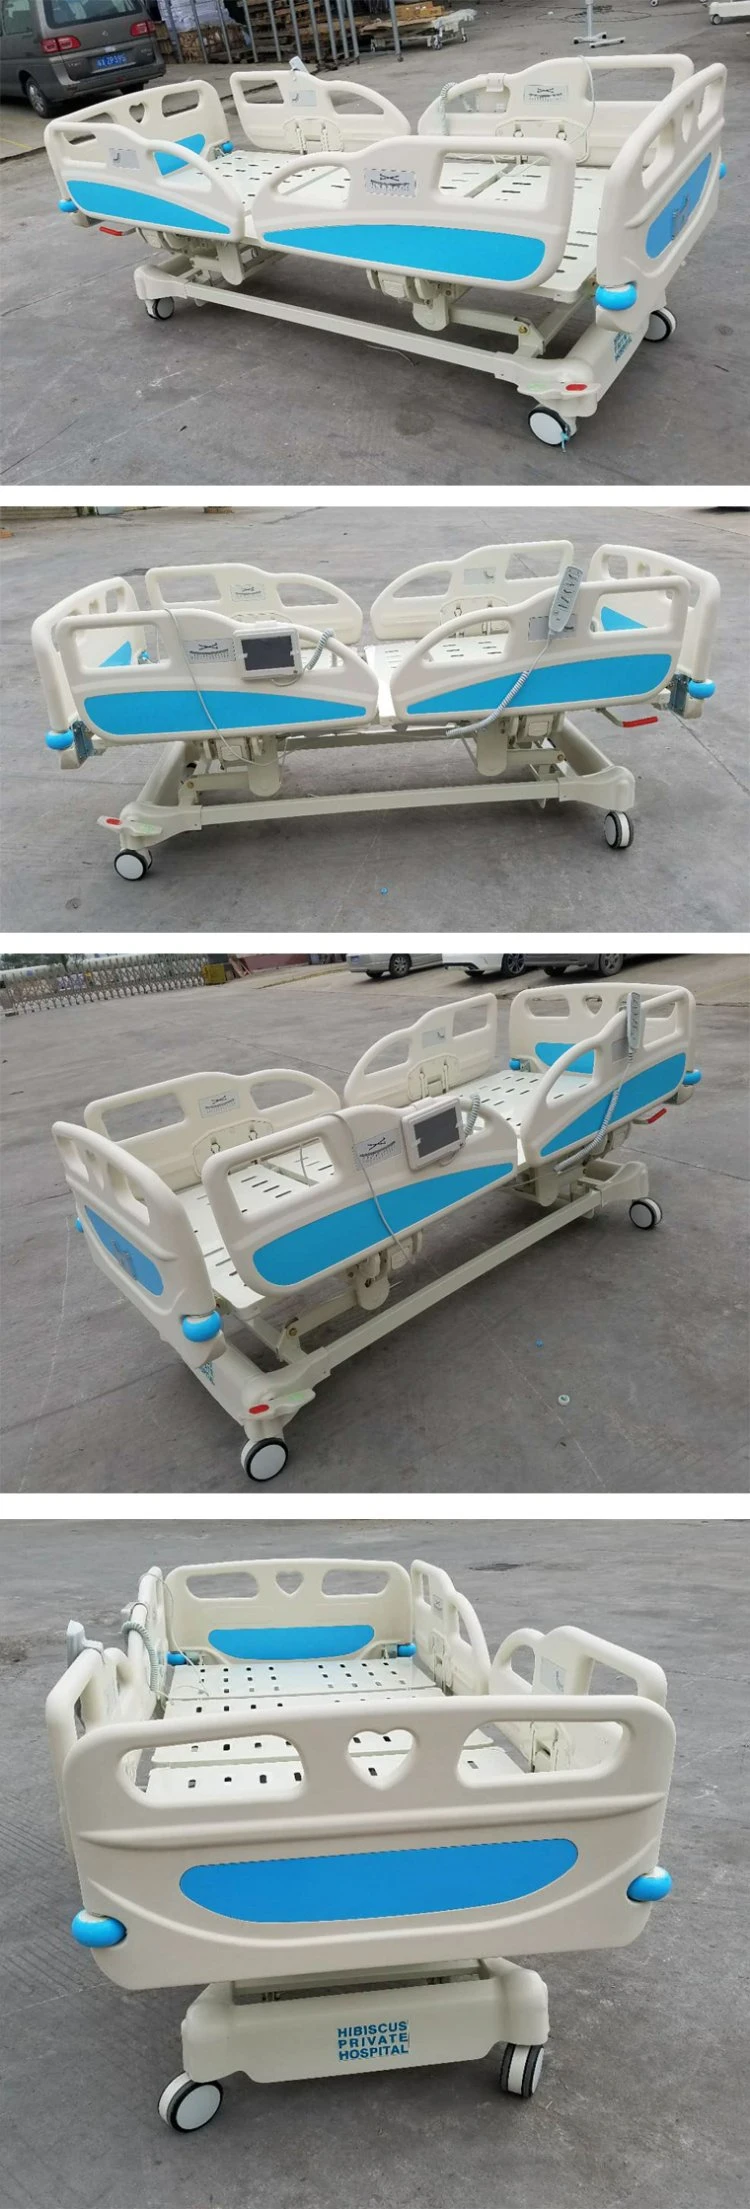 Cheapest Hospital Equipment Multifunction Medical Beds Electric 5 Functions Hospital Bed Price with CPR